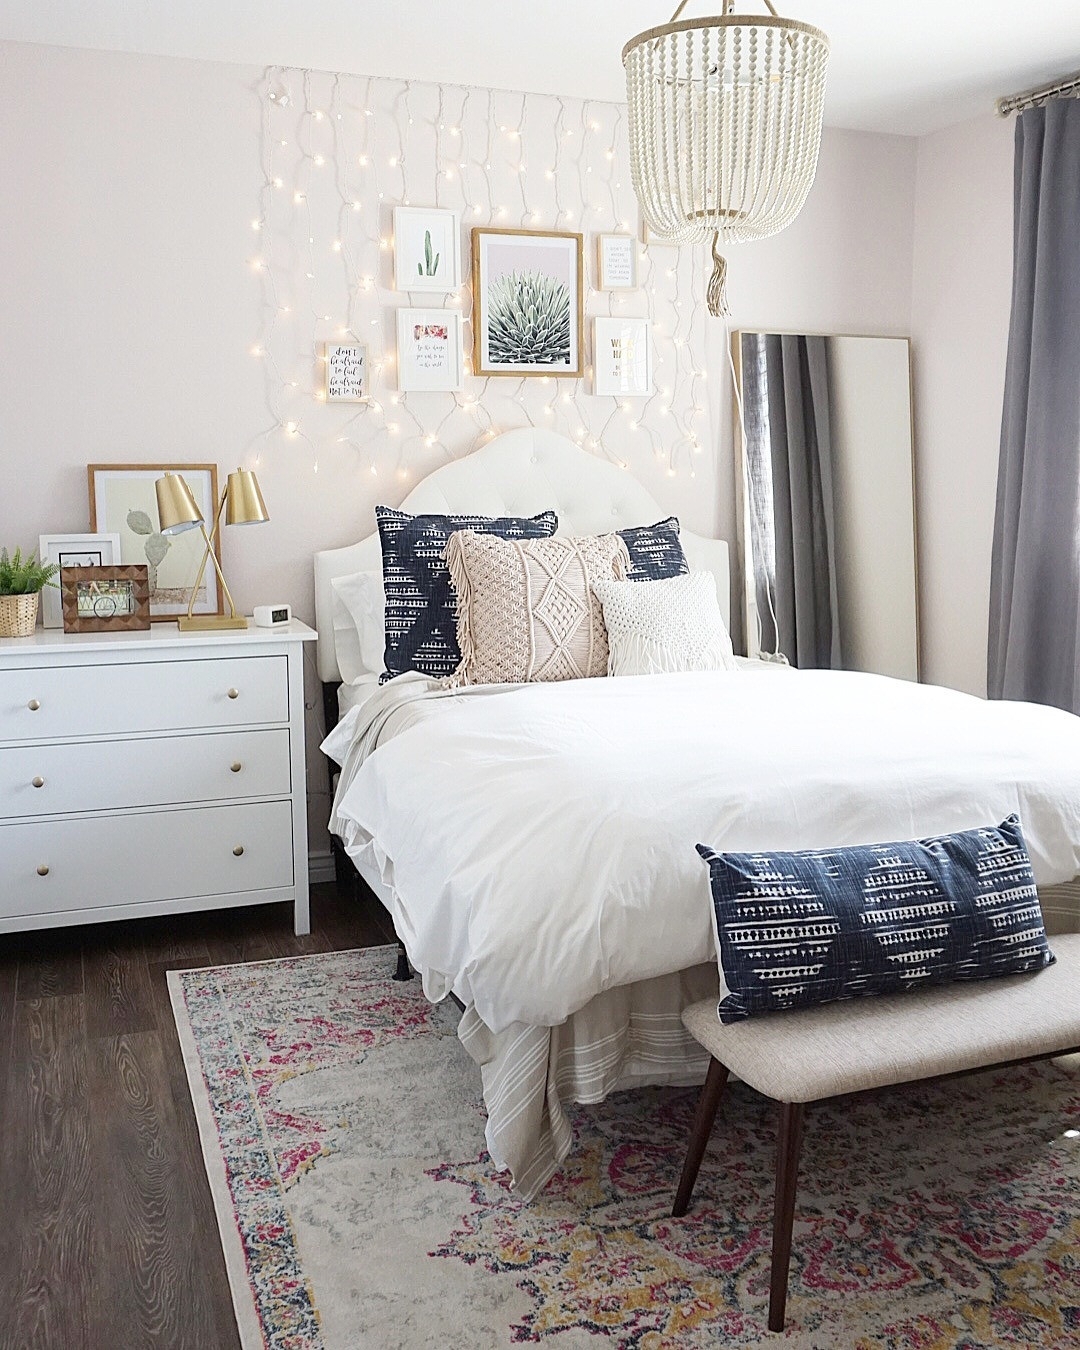 30 Boho Bedroom Ideas for a Colorful, Carefree Space - Foter